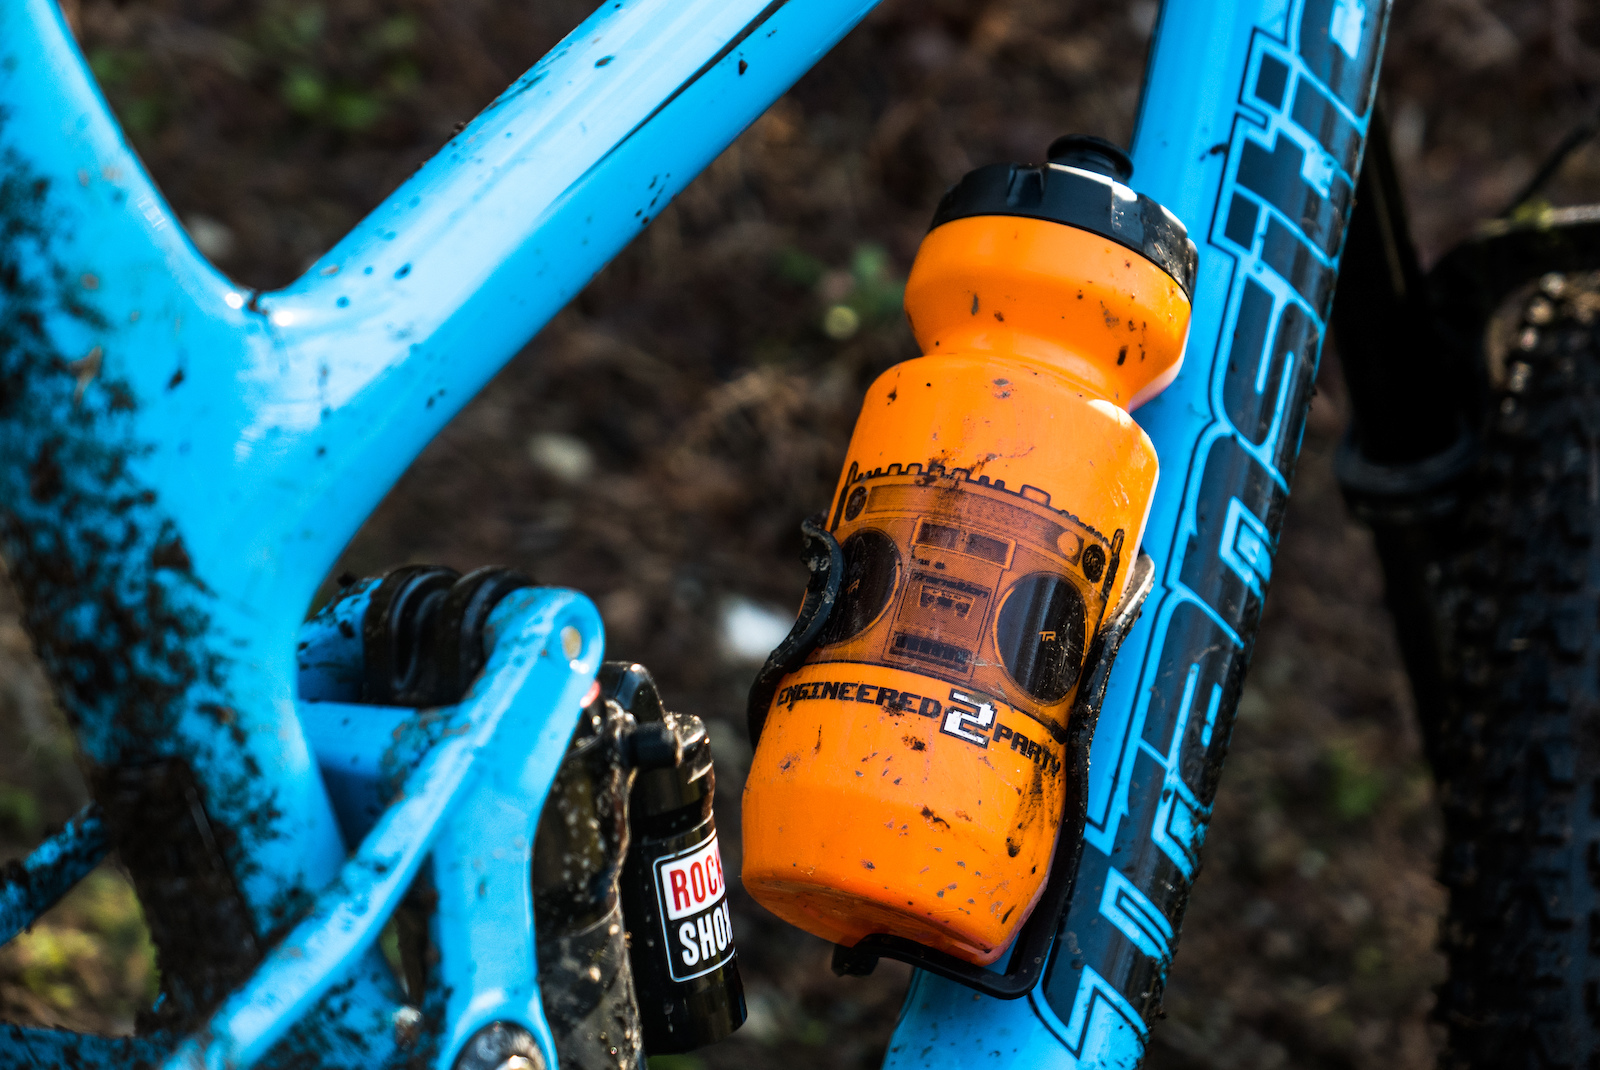 Engineered to Party Bottle

Spring 2017 New Gear from Transition Bikes.
Available now at your local dealer or transitionbikes.com